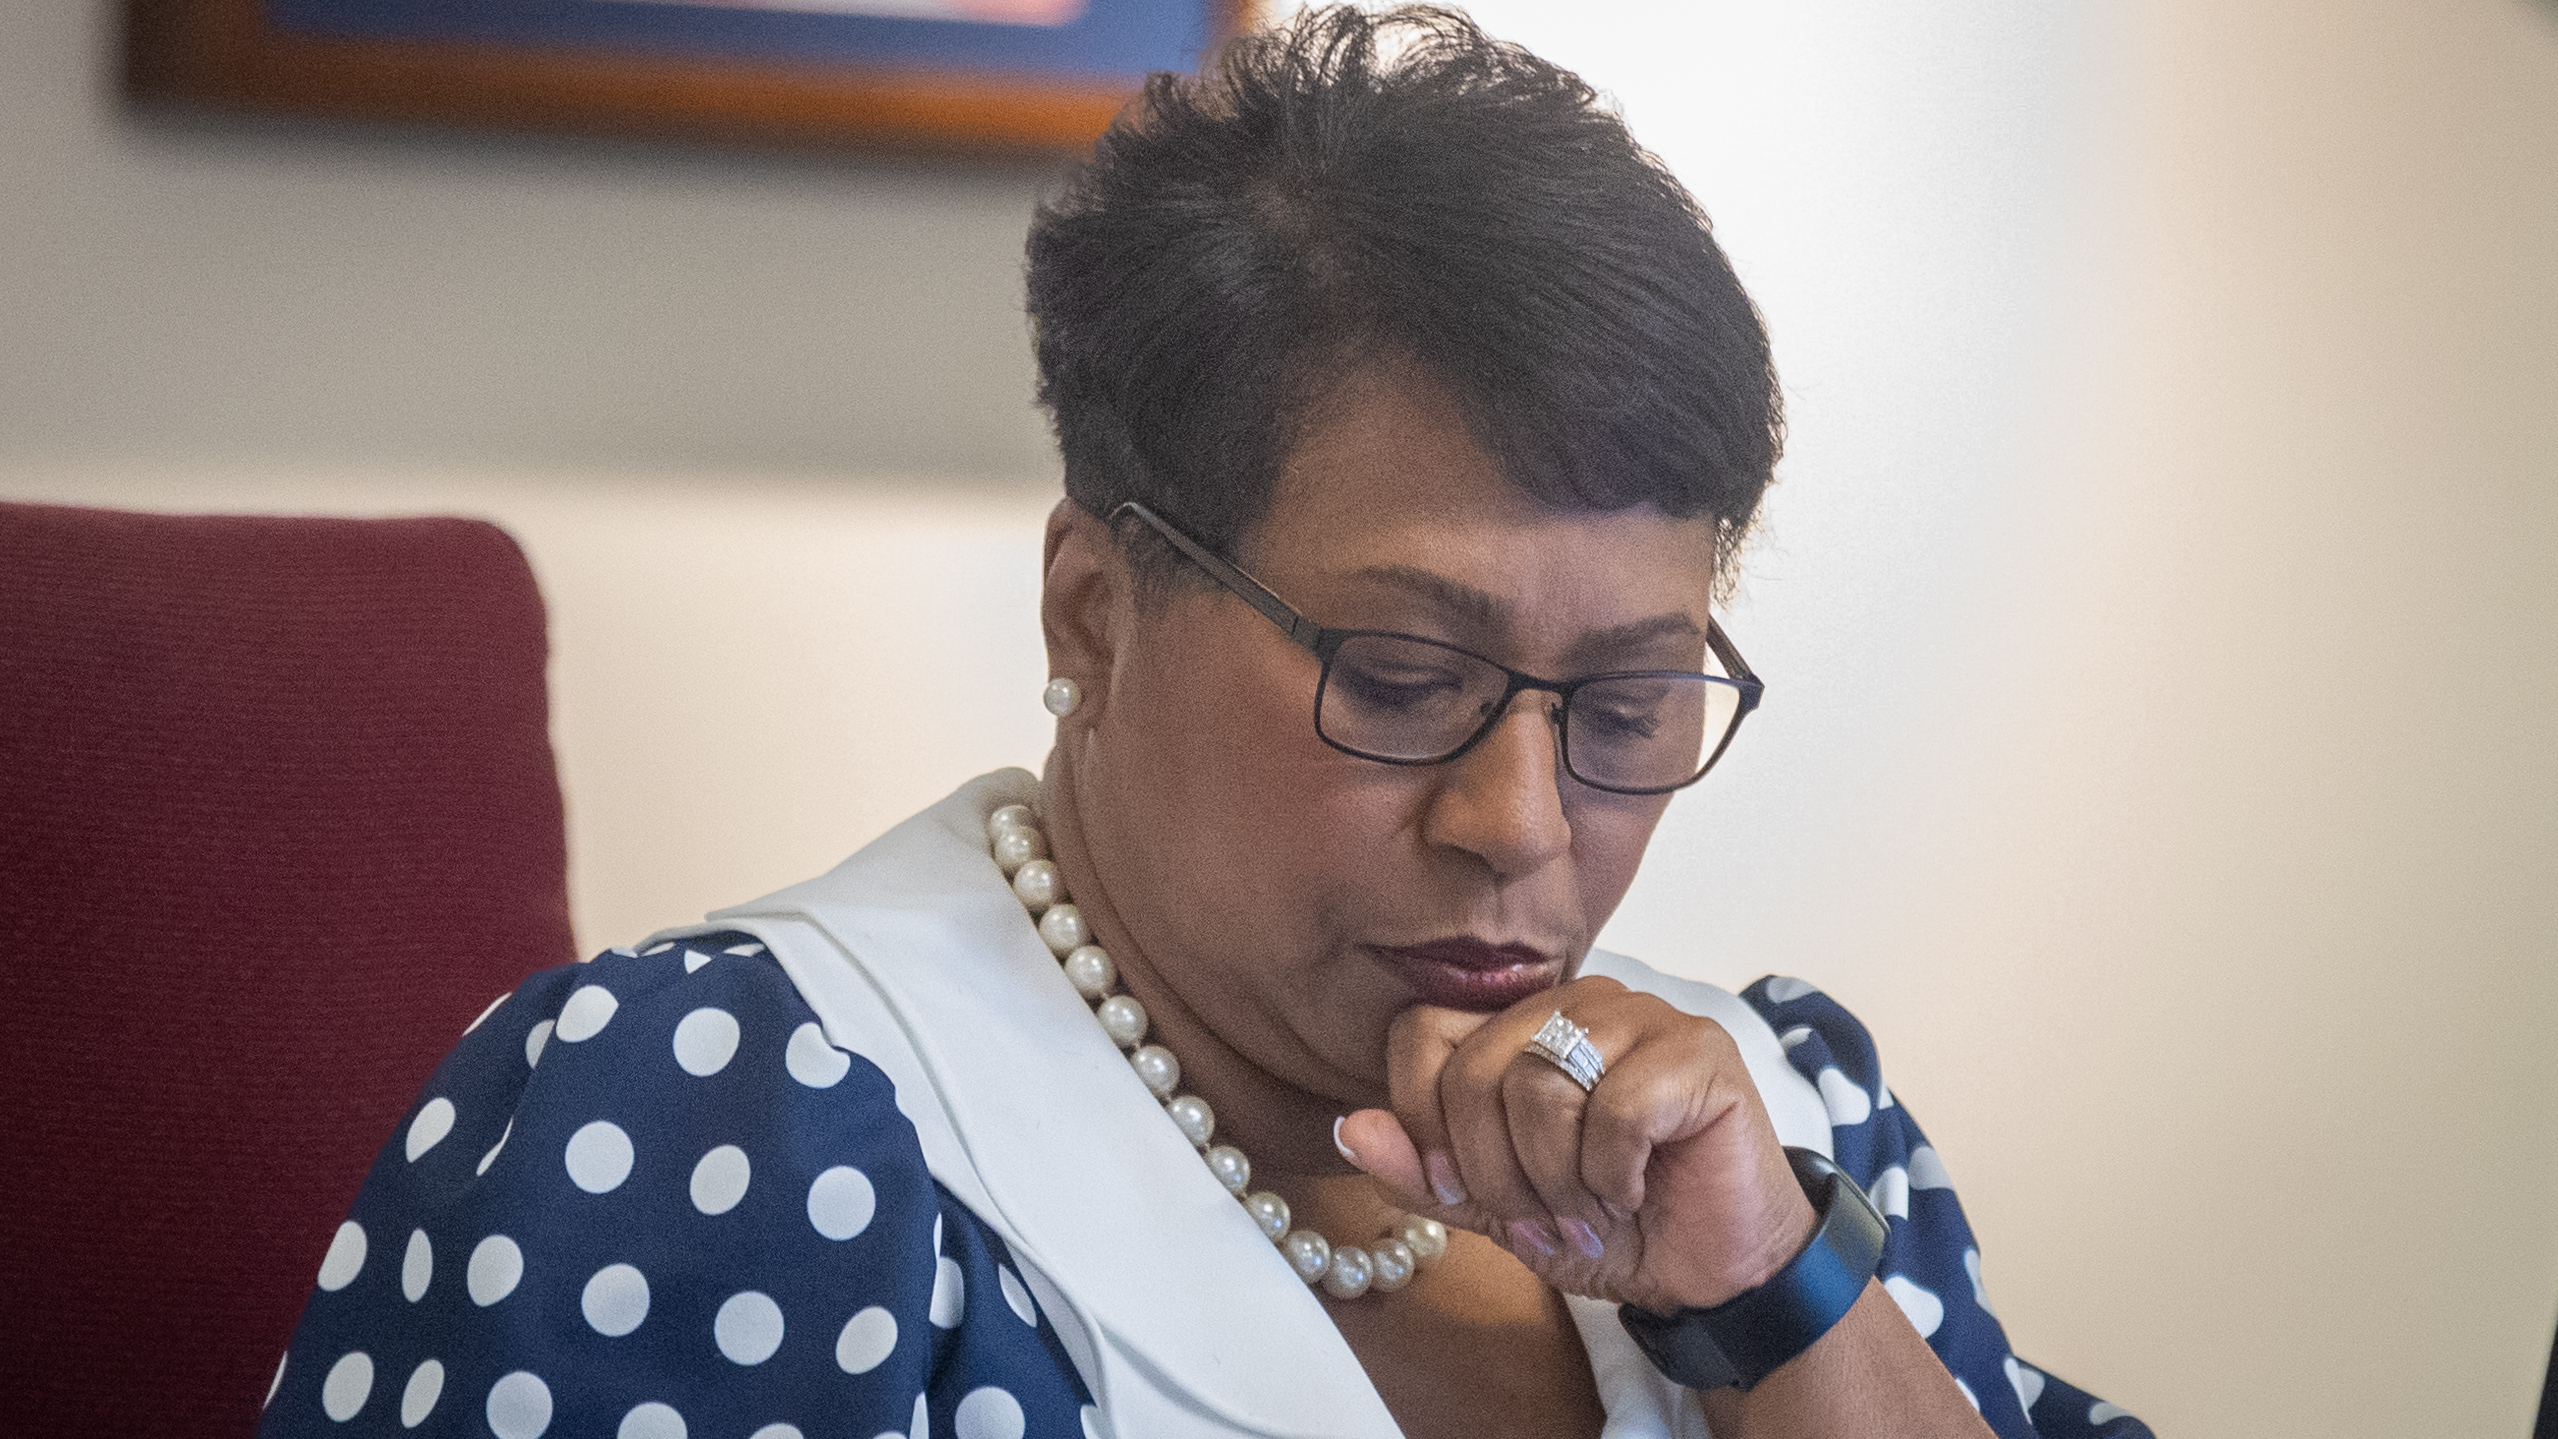 Featured image for “Superintendent Diana Greene ends trailblazing Duval career under scrutiny”